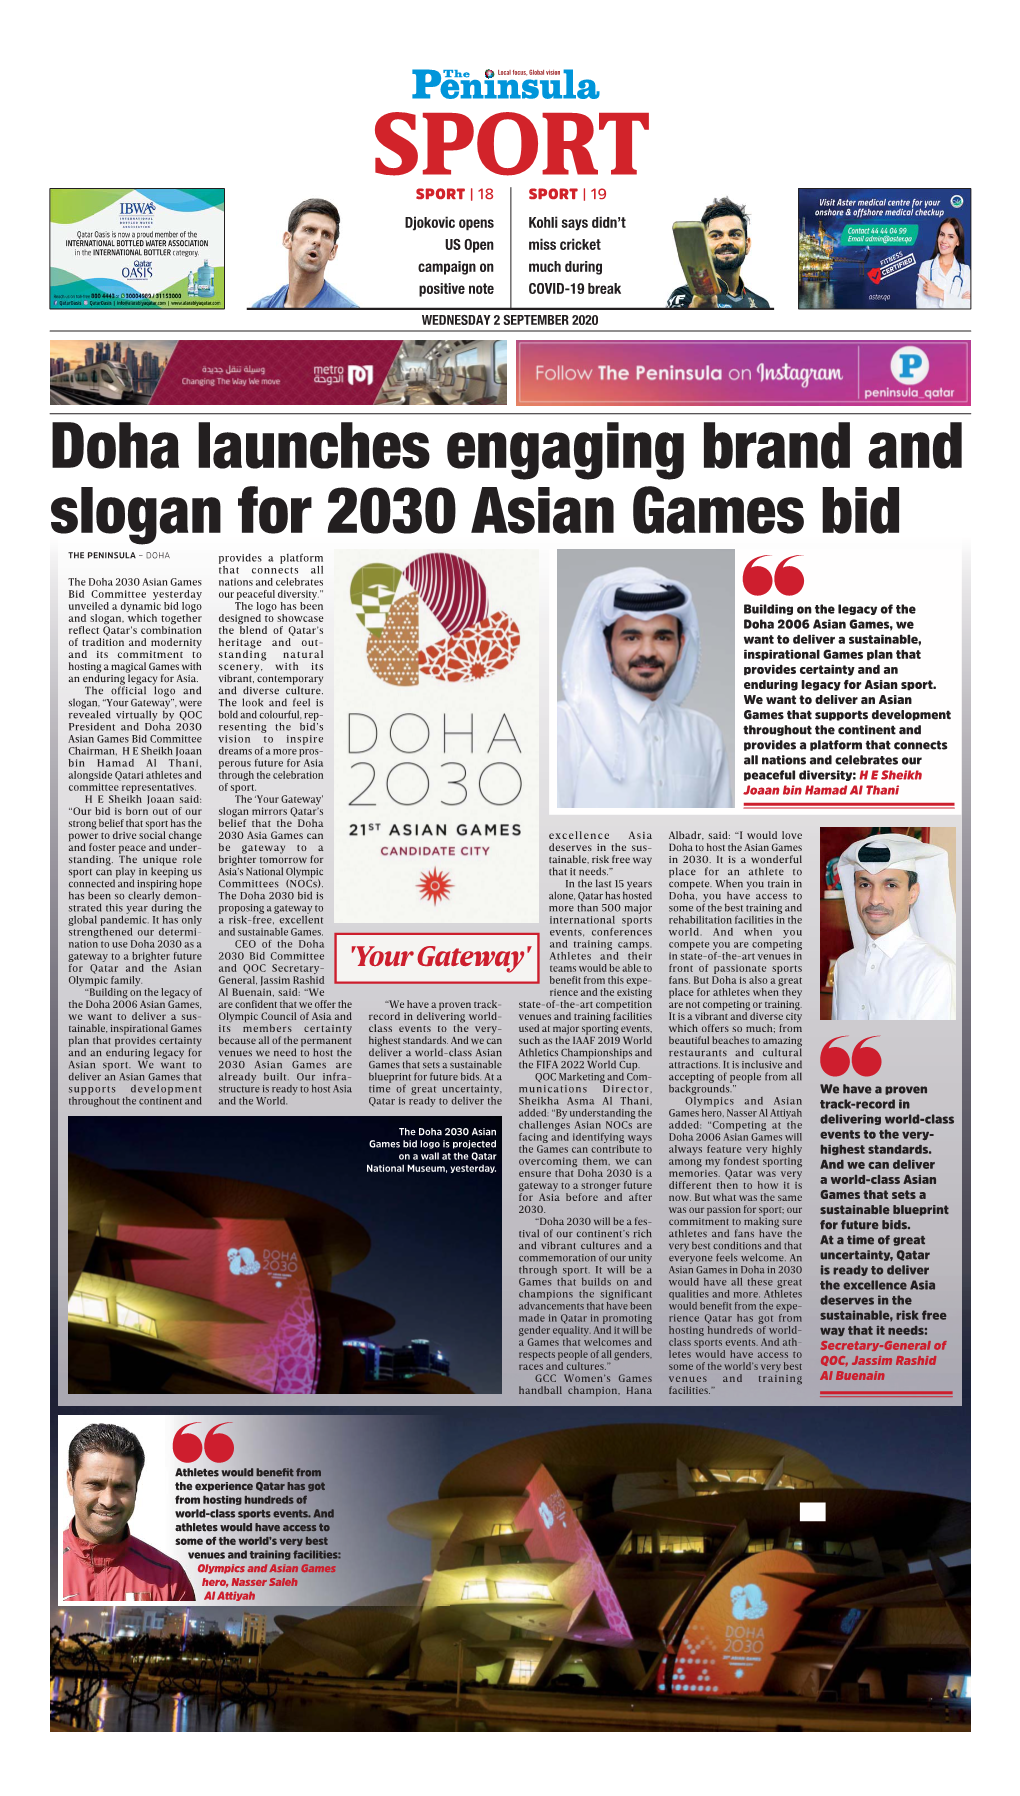 Doha Launches Engaging Brand and Slogan for 2030 Asian Games